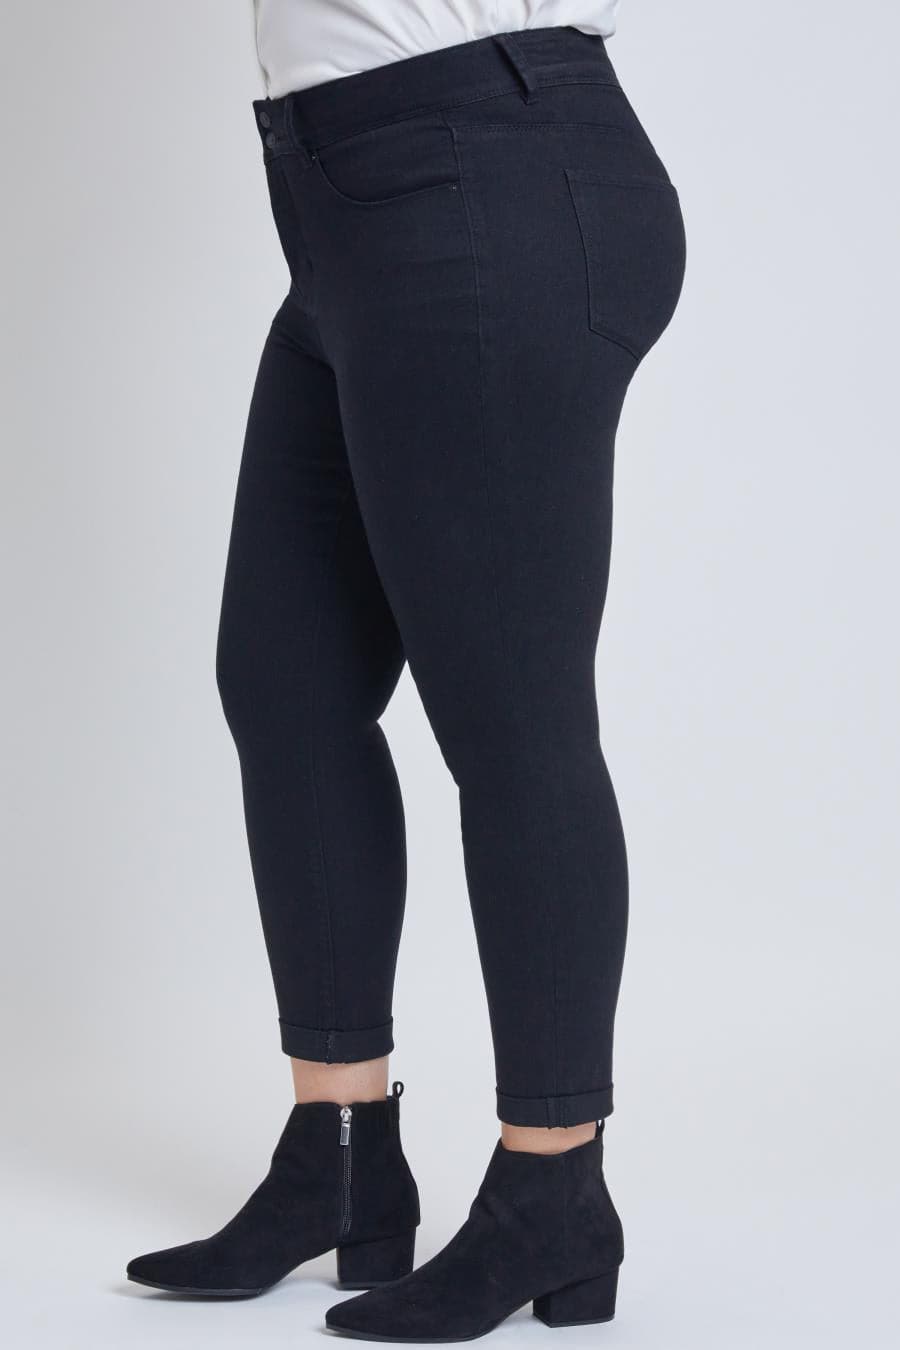 Women's Plus Size Tummy Control Rolled Cuff Ankle Jeans From ROYALTY